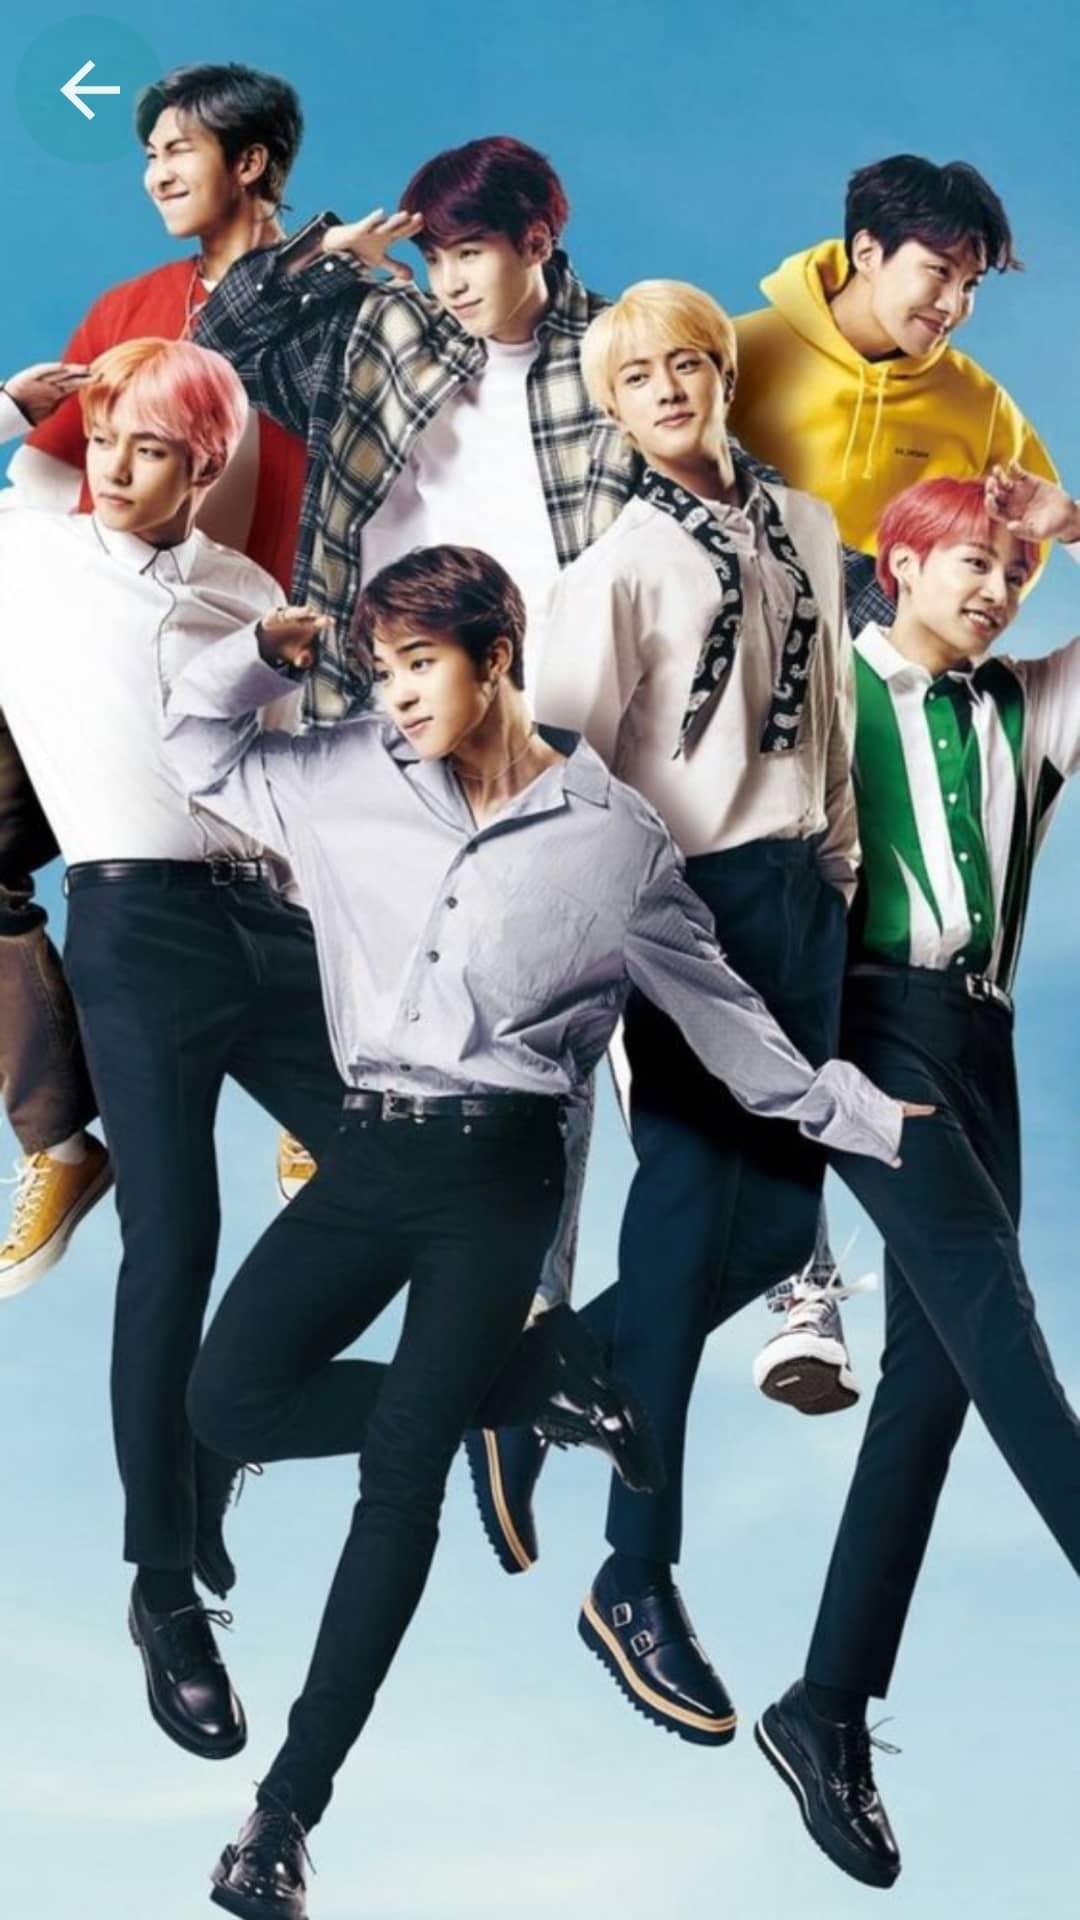 New Bts Wallpapers Kpop Wallpaper Hd 2019 For Android